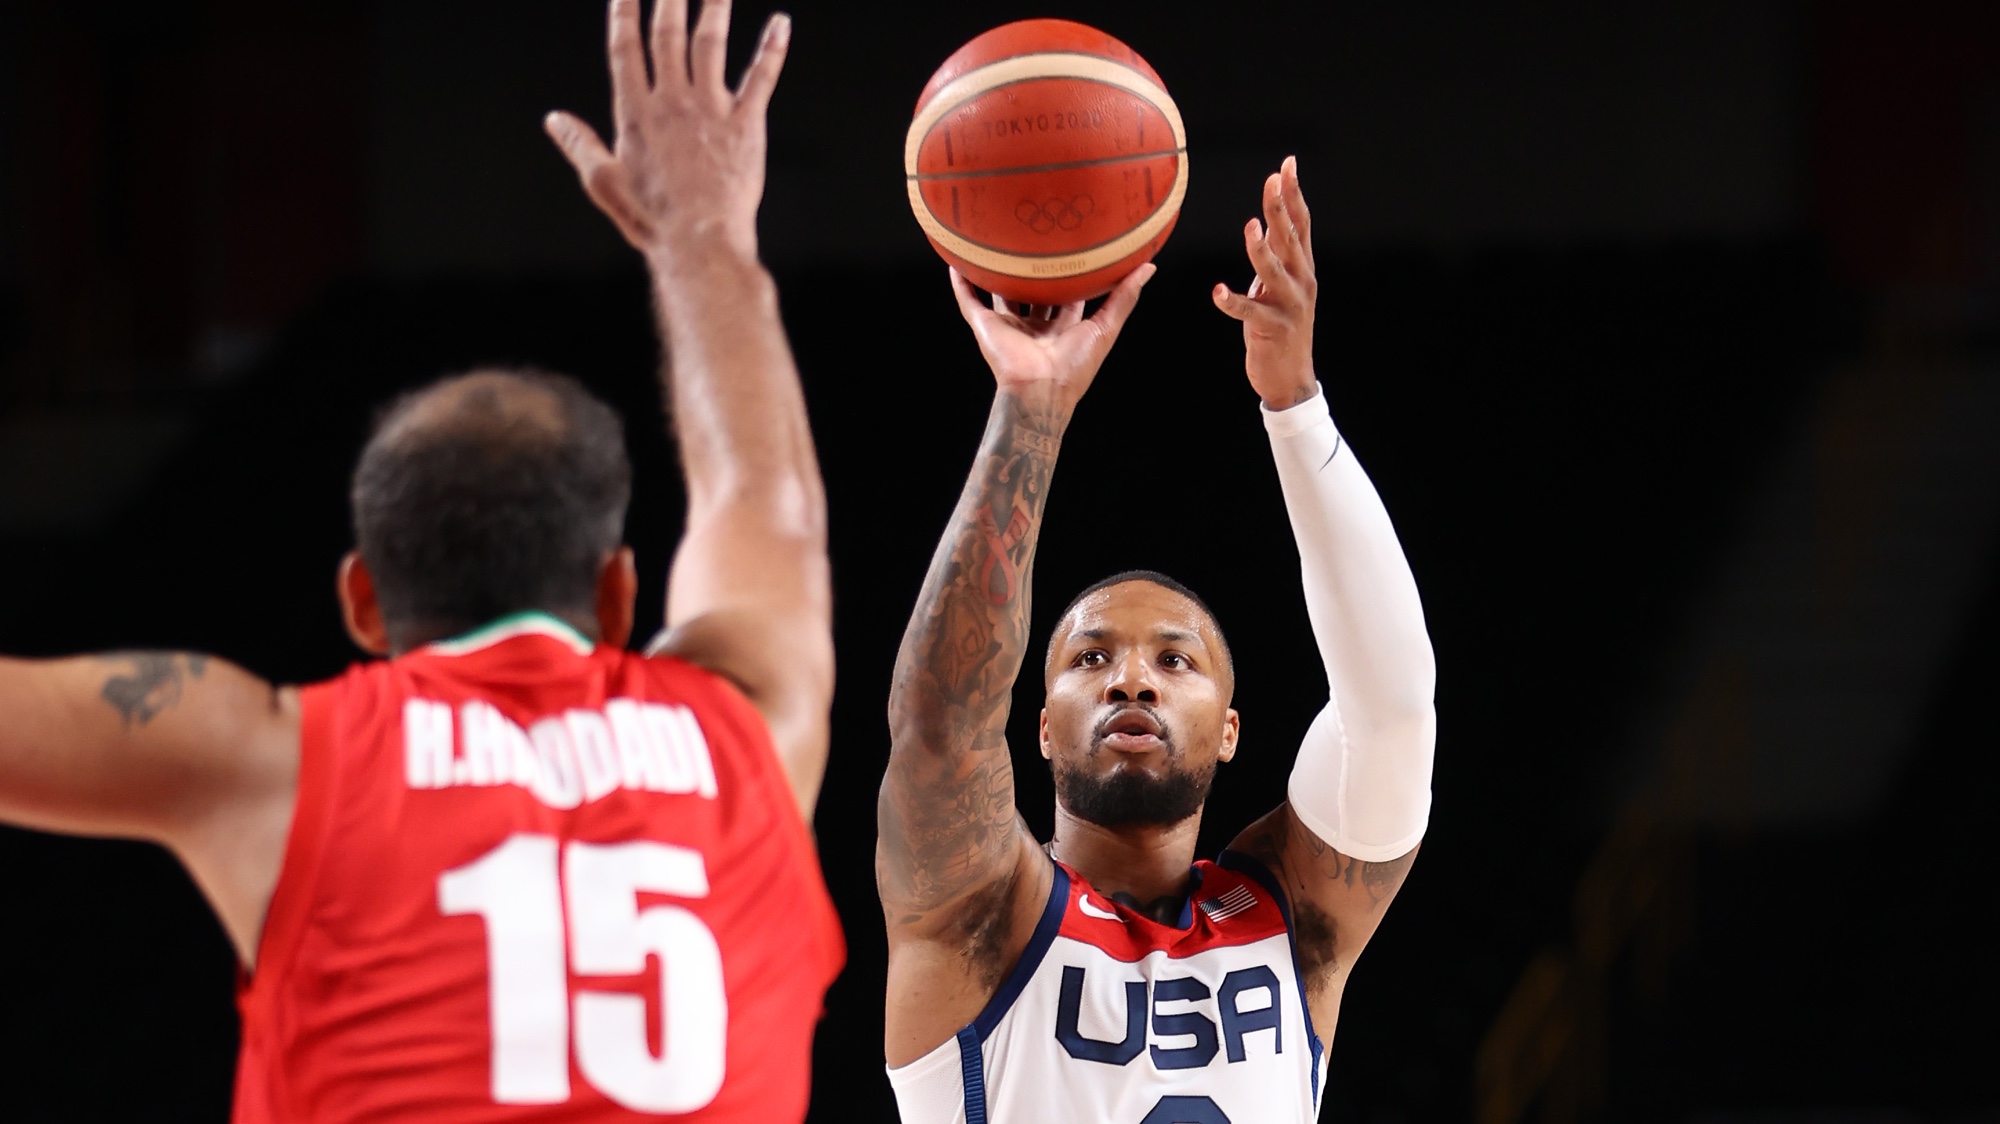 Team Usa Vs Czech Republic Men S Basketball Live Stream Olympics Channels Start Time And How To Watch Online Tom S Guide